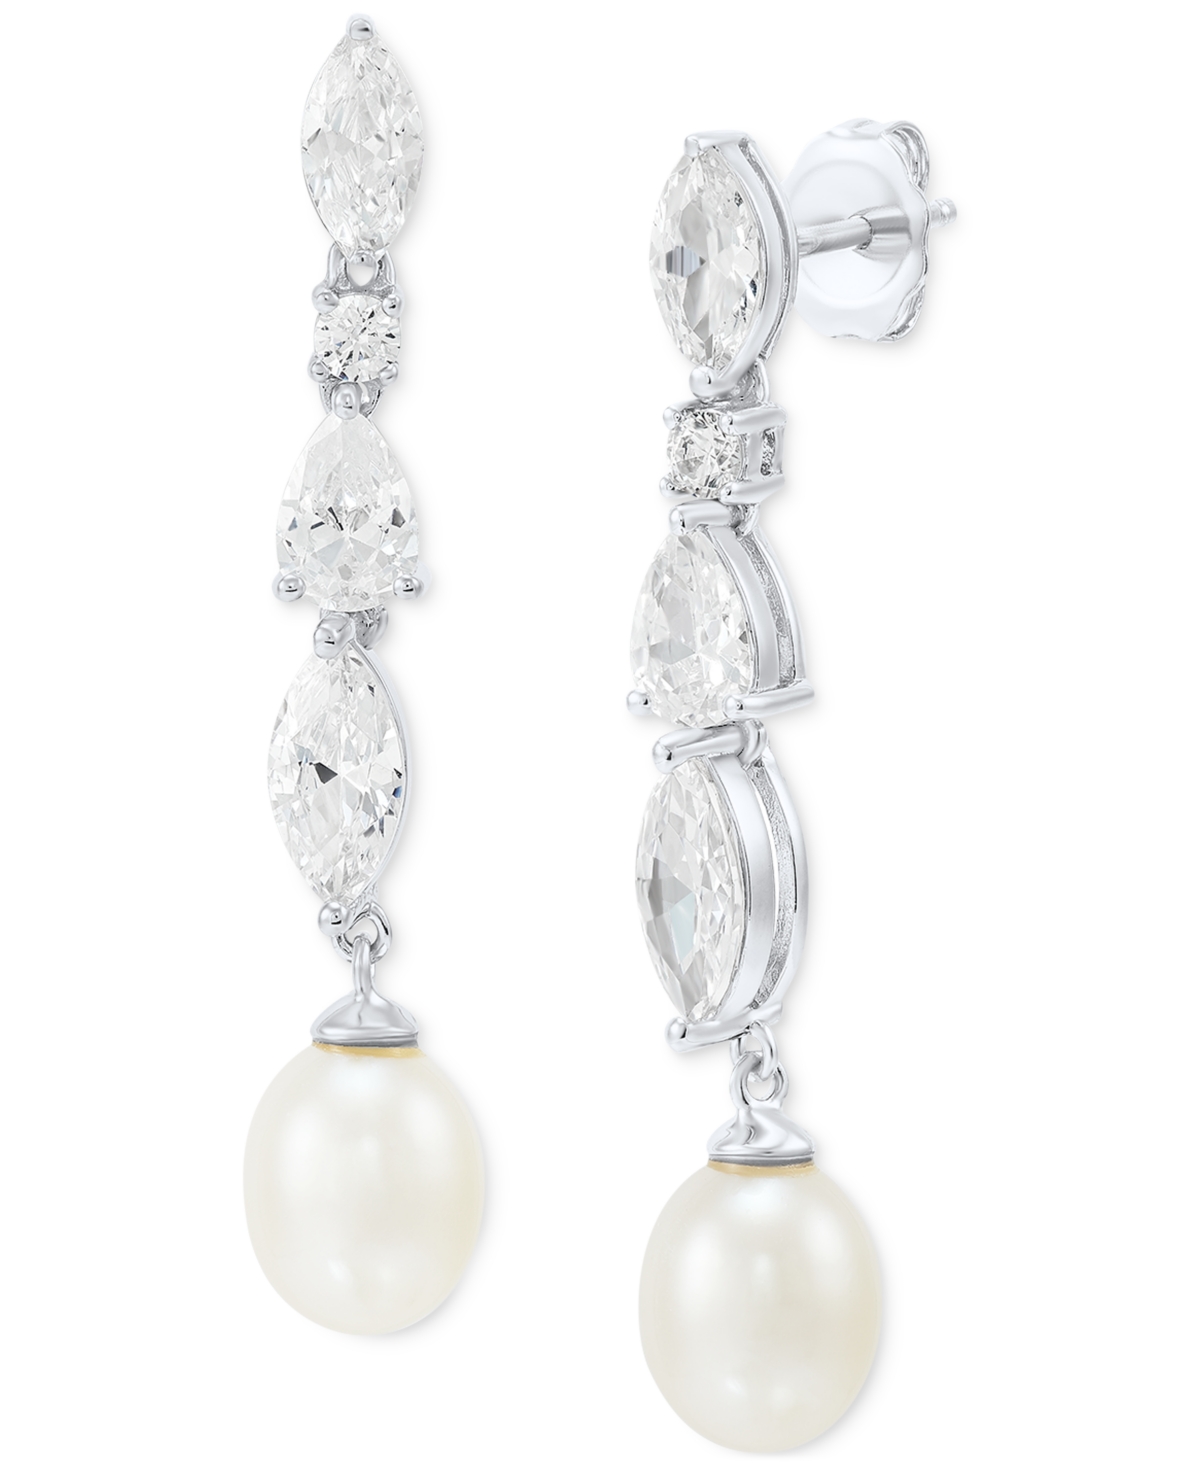 Cultured Freshwater Pearl (9 x 7mm) & Cubic Zirconia Drop Earrings in Sterling Silver, Created for Macy's - Silver